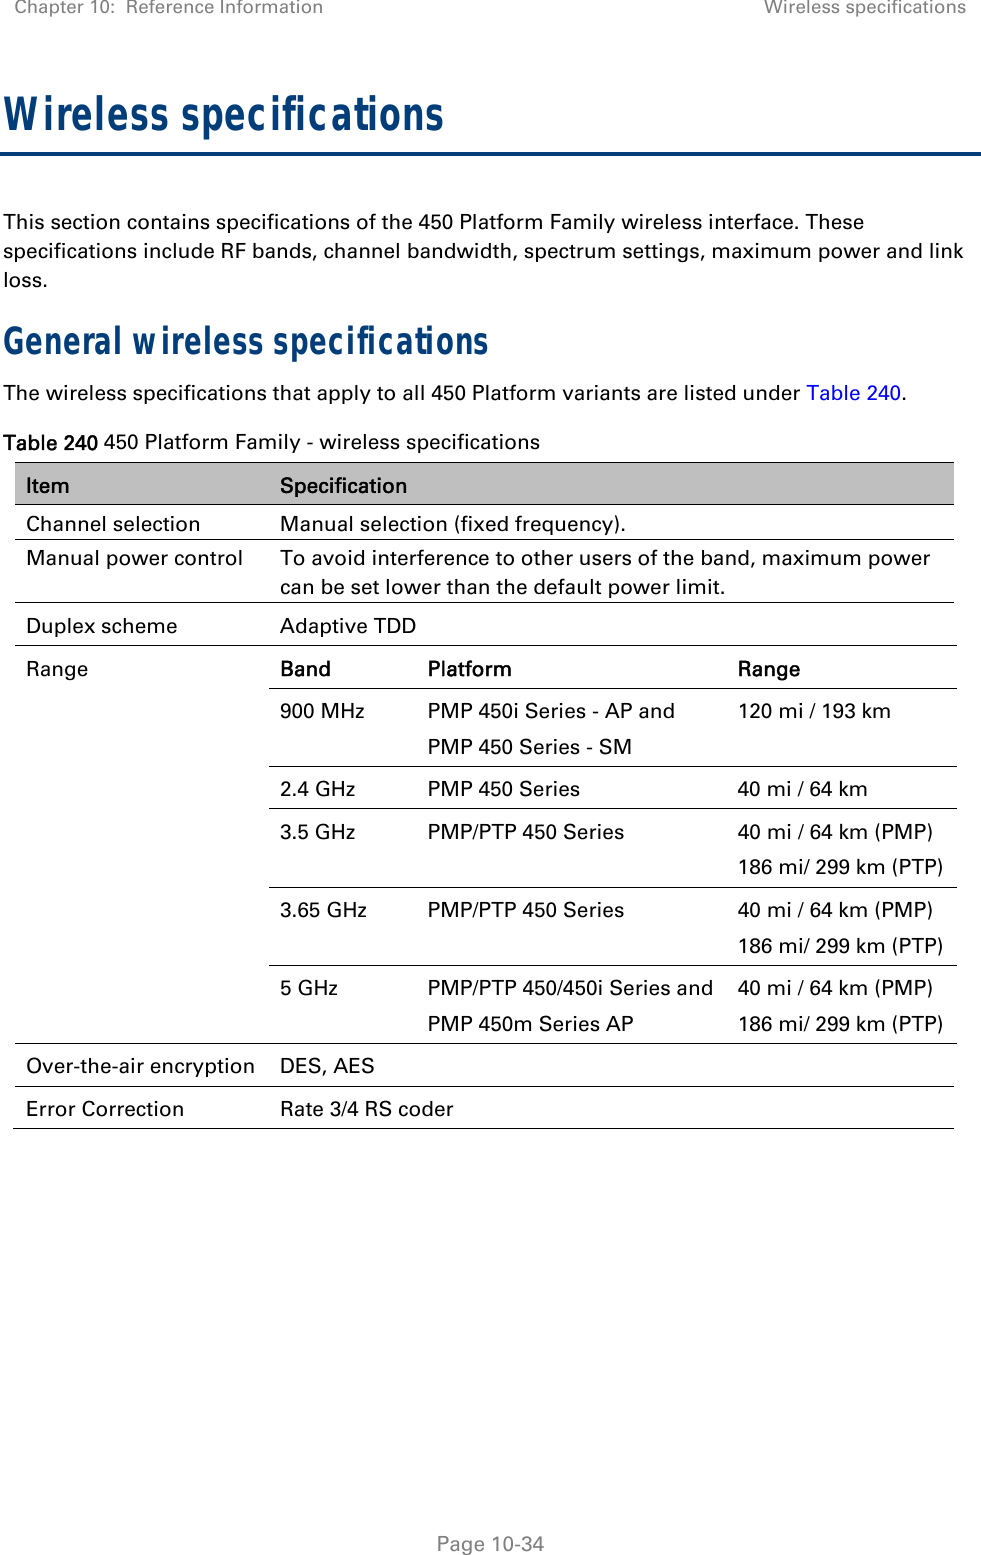 Chapter 10:  Reference Information Wireless specifications   Page 10-34 Wireless specifications This section contains specifications of the 450 Platform Family wireless interface. These specifications include RF bands, channel bandwidth, spectrum settings, maximum power and link loss. General wireless specifications The wireless specifications that apply to all 450 Platform variants are listed under Table 240. Table 240 450 Platform Family - wireless specifications Item  Specification Channel selection  Manual selection (fixed frequency). Manual power control   To avoid interference to other users of the band, maximum power can be set lower than the default power limit. Duplex scheme  Adaptive TDD Range  Band Platform  Range 900 MHz   PMP 450i Series - AP and  PMP 450 Series - SM 120 mi / 193 km 2.4 GHz   PMP 450 Series   40 mi / 64 km 3.5 GHz   PMP/PTP 450 Series  40 mi / 64 km (PMP) 186 mi/ 299 km (PTP) 3.65 GHz   PMP/PTP 450 Series  40 mi / 64 km (PMP) 186 mi/ 299 km (PTP) 5 GHz   PMP/PTP 450/450i Series and PMP 450m Series AP 40 mi / 64 km (PMP) 186 mi/ 299 km (PTP) Over-the-air encryption  DES, AES Error Correction  Rate 3/4 RS coder    